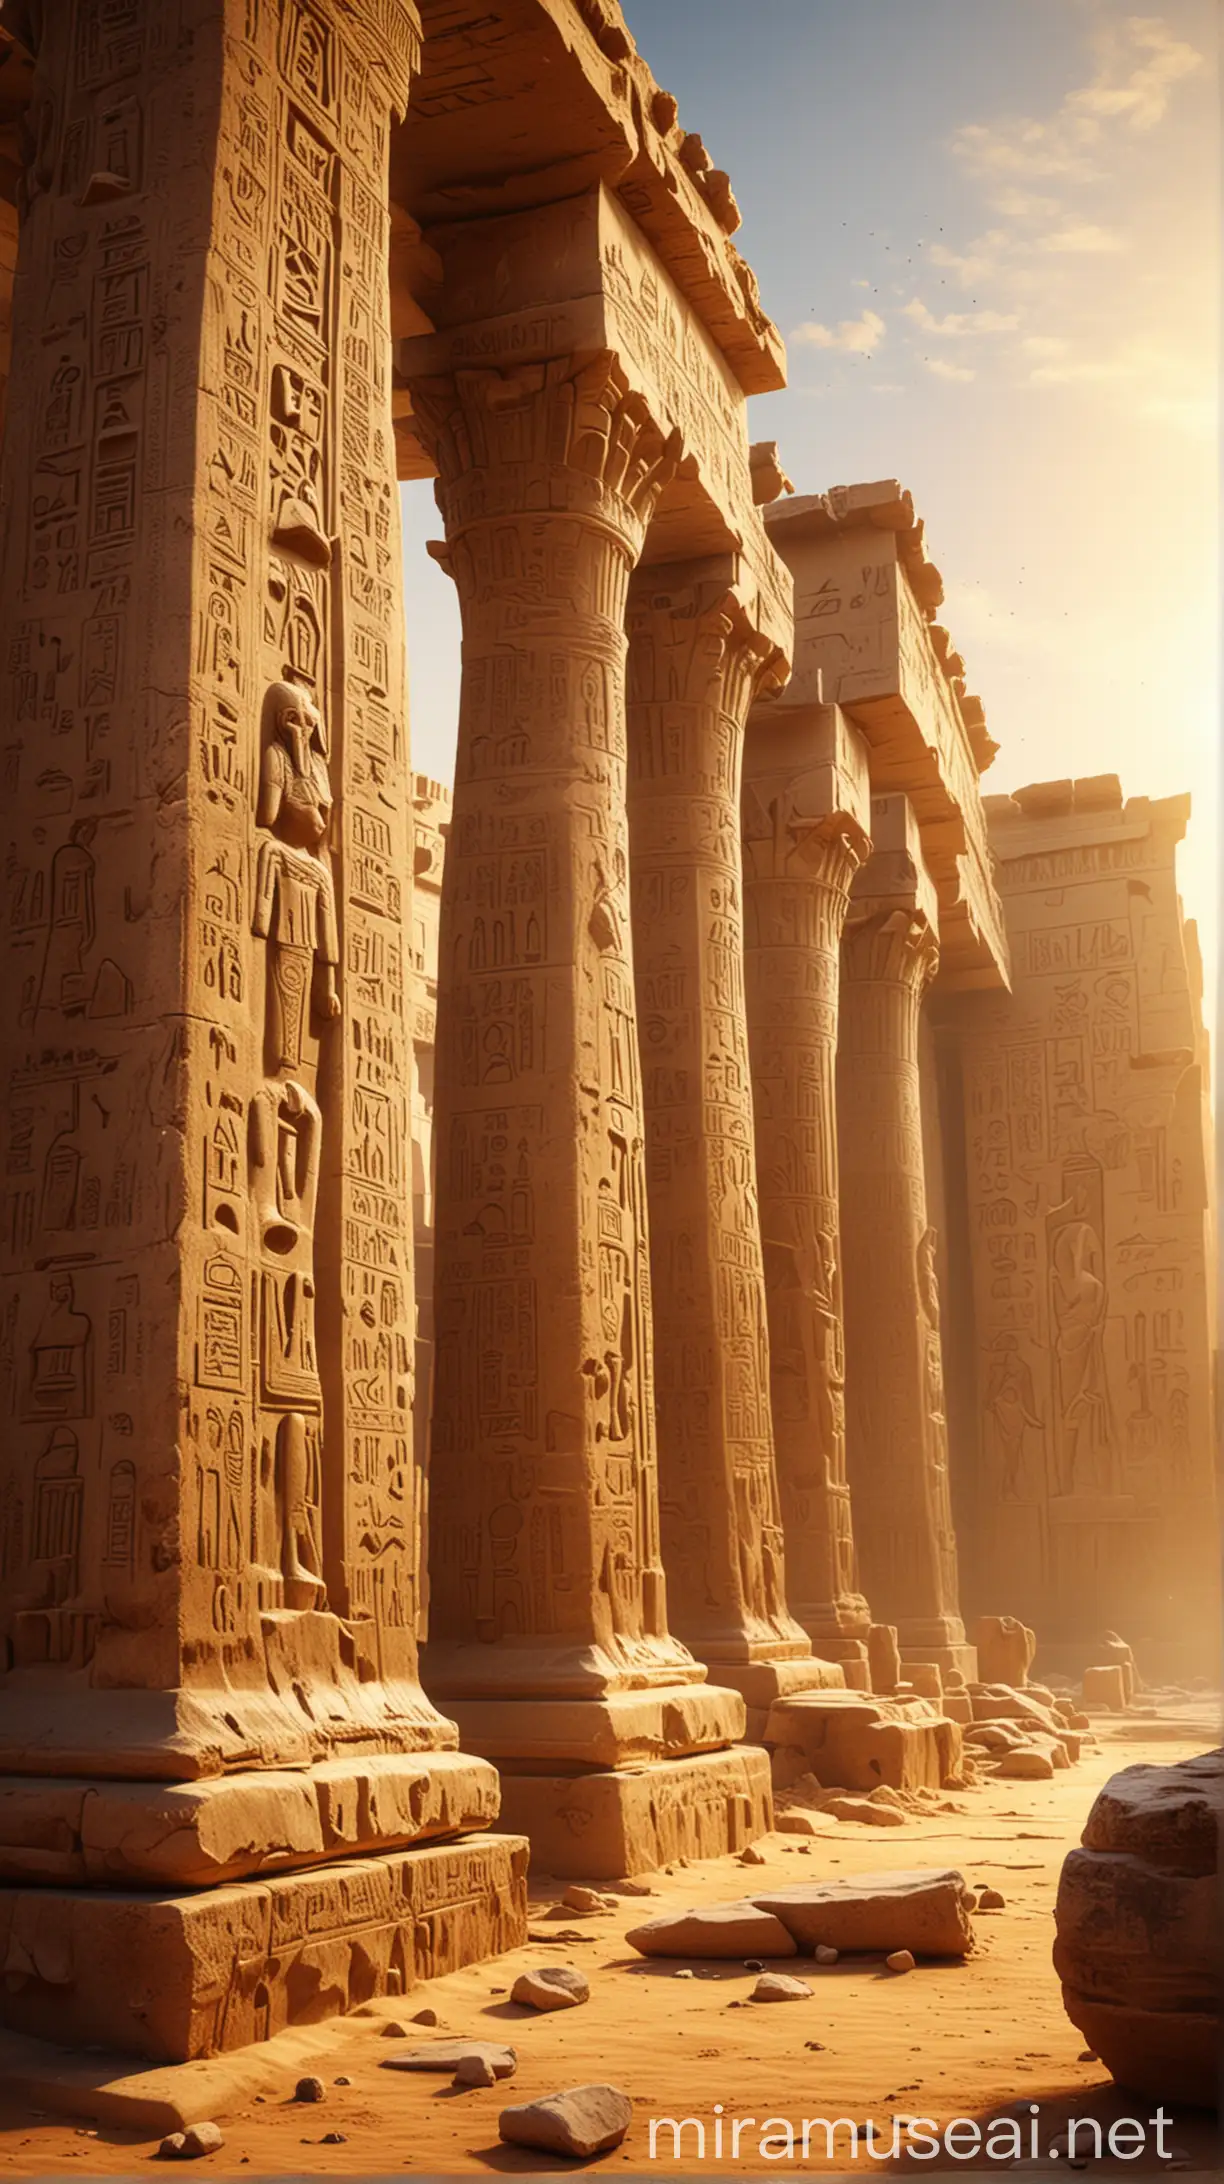 Hyper Realistic Depiction of Ancient Egyptian Ruins in Golden Sunlight